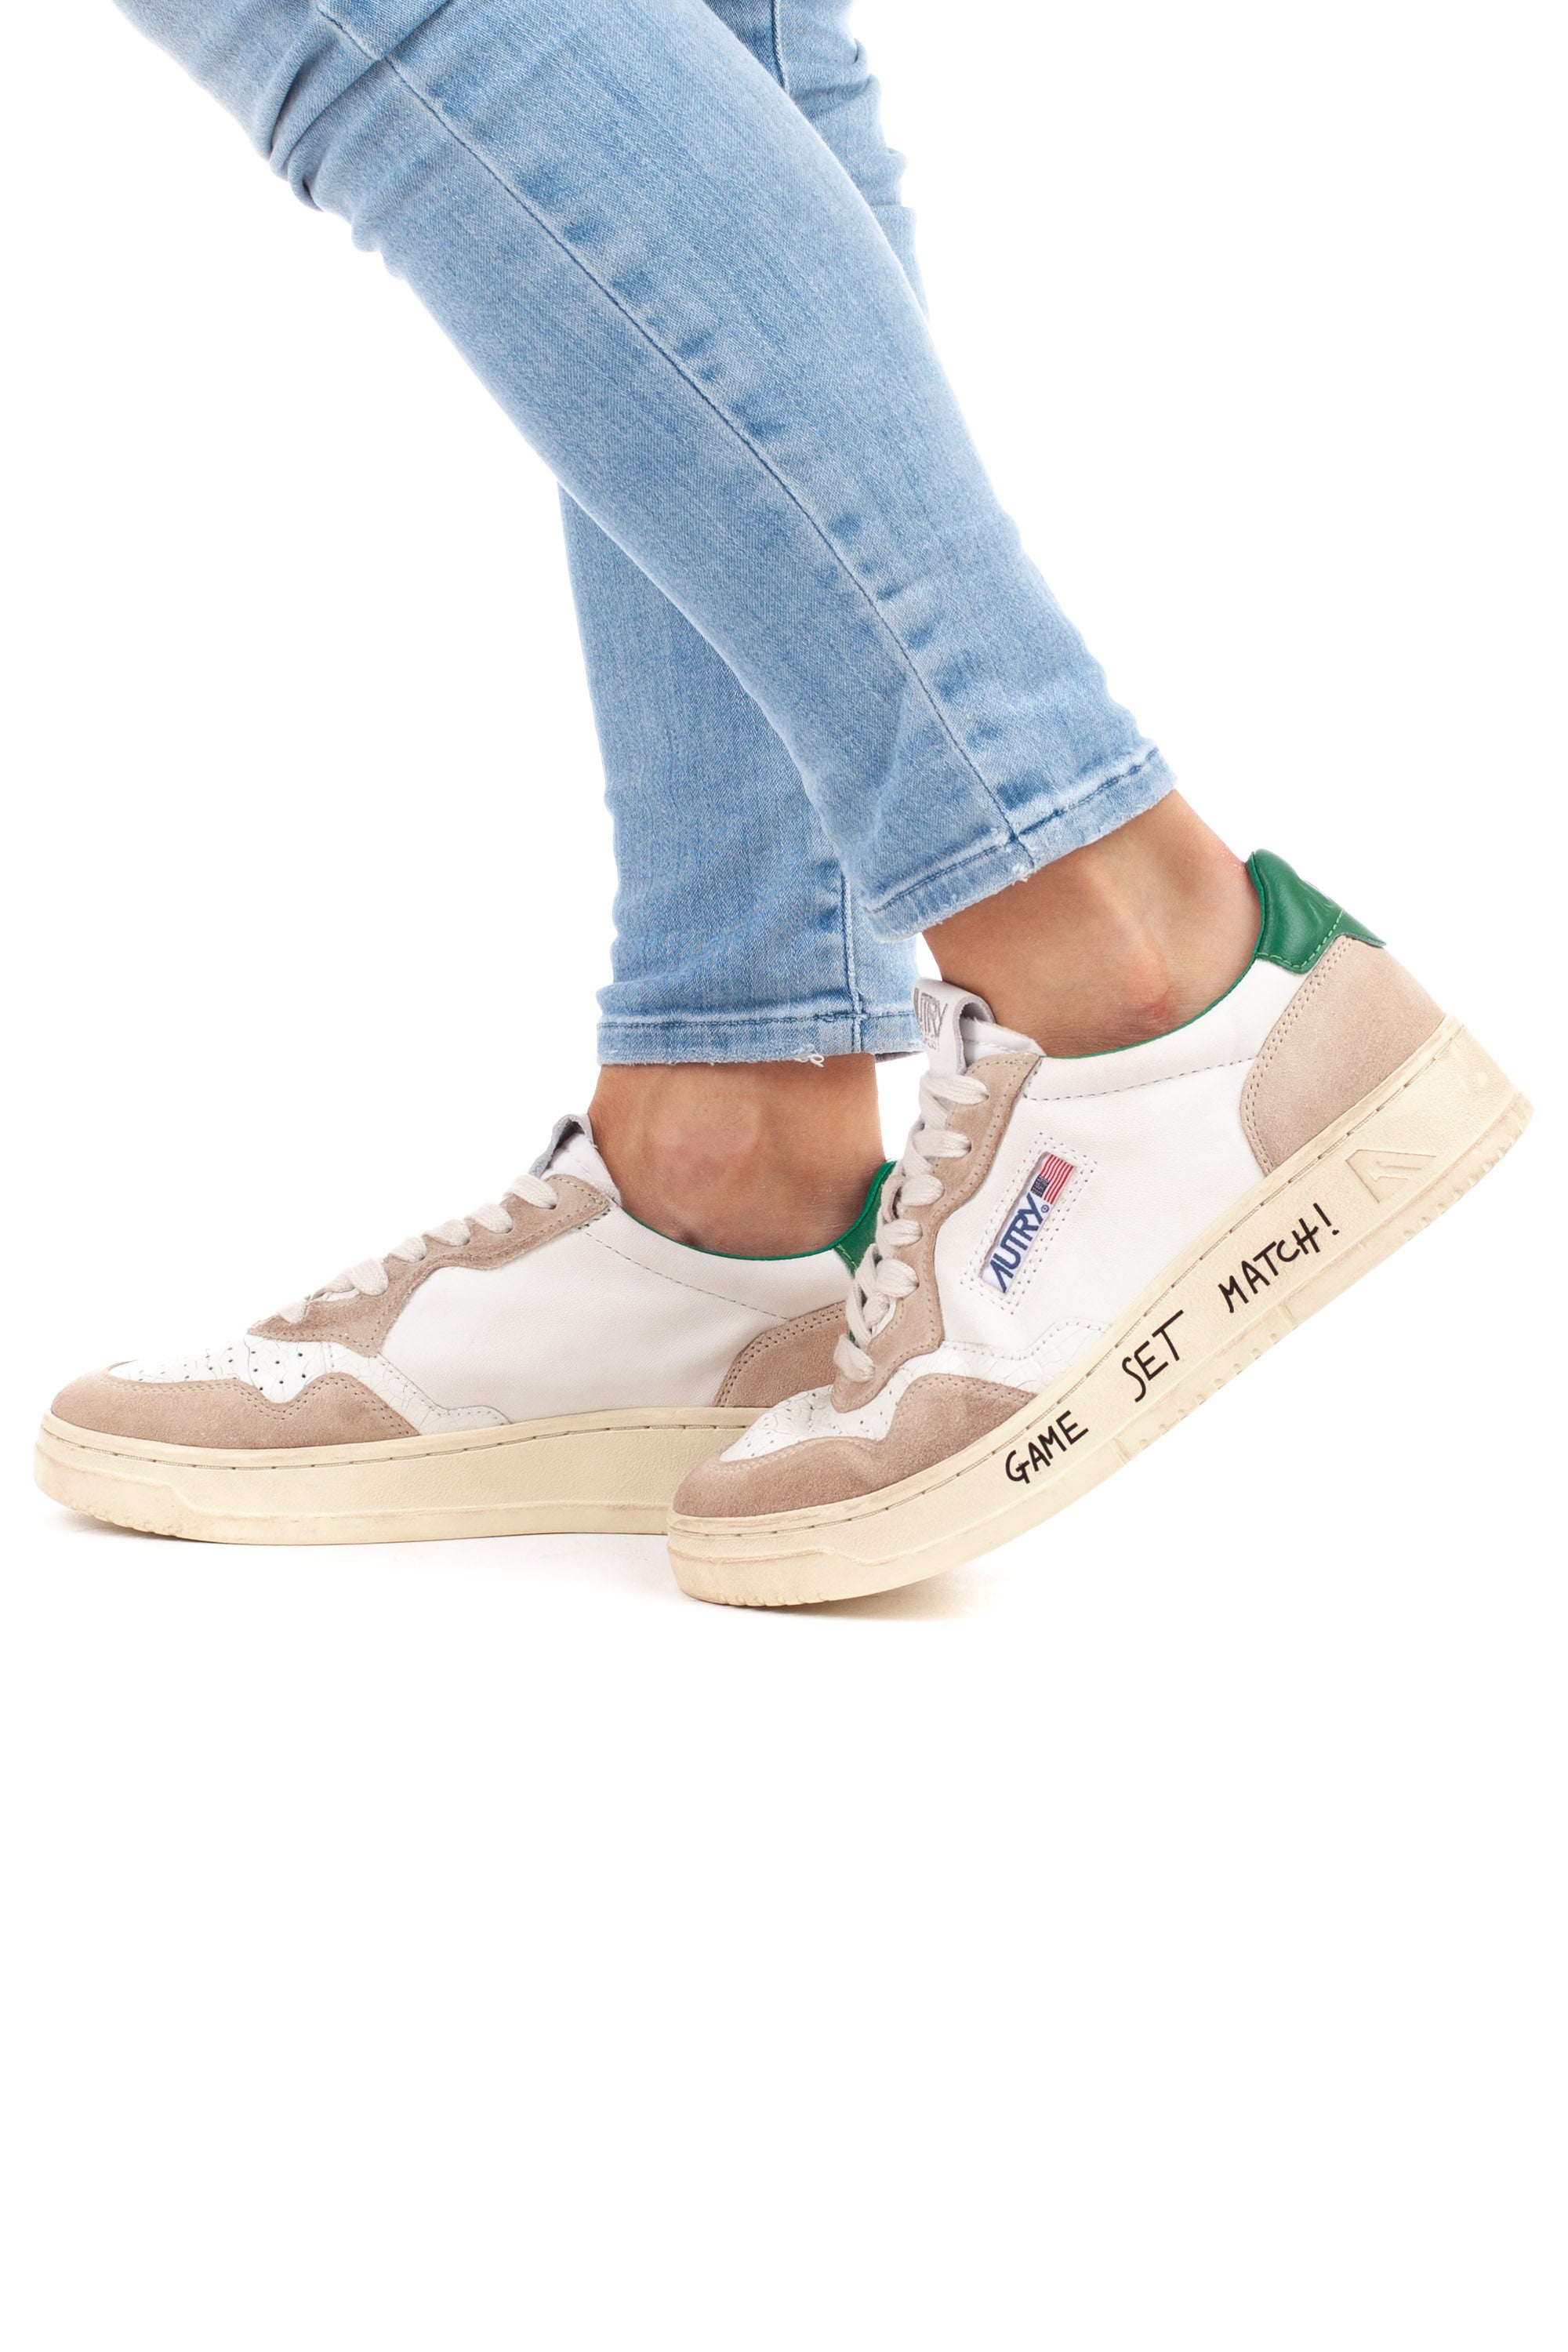 Medalist women's sneaker with green writing and heel tab